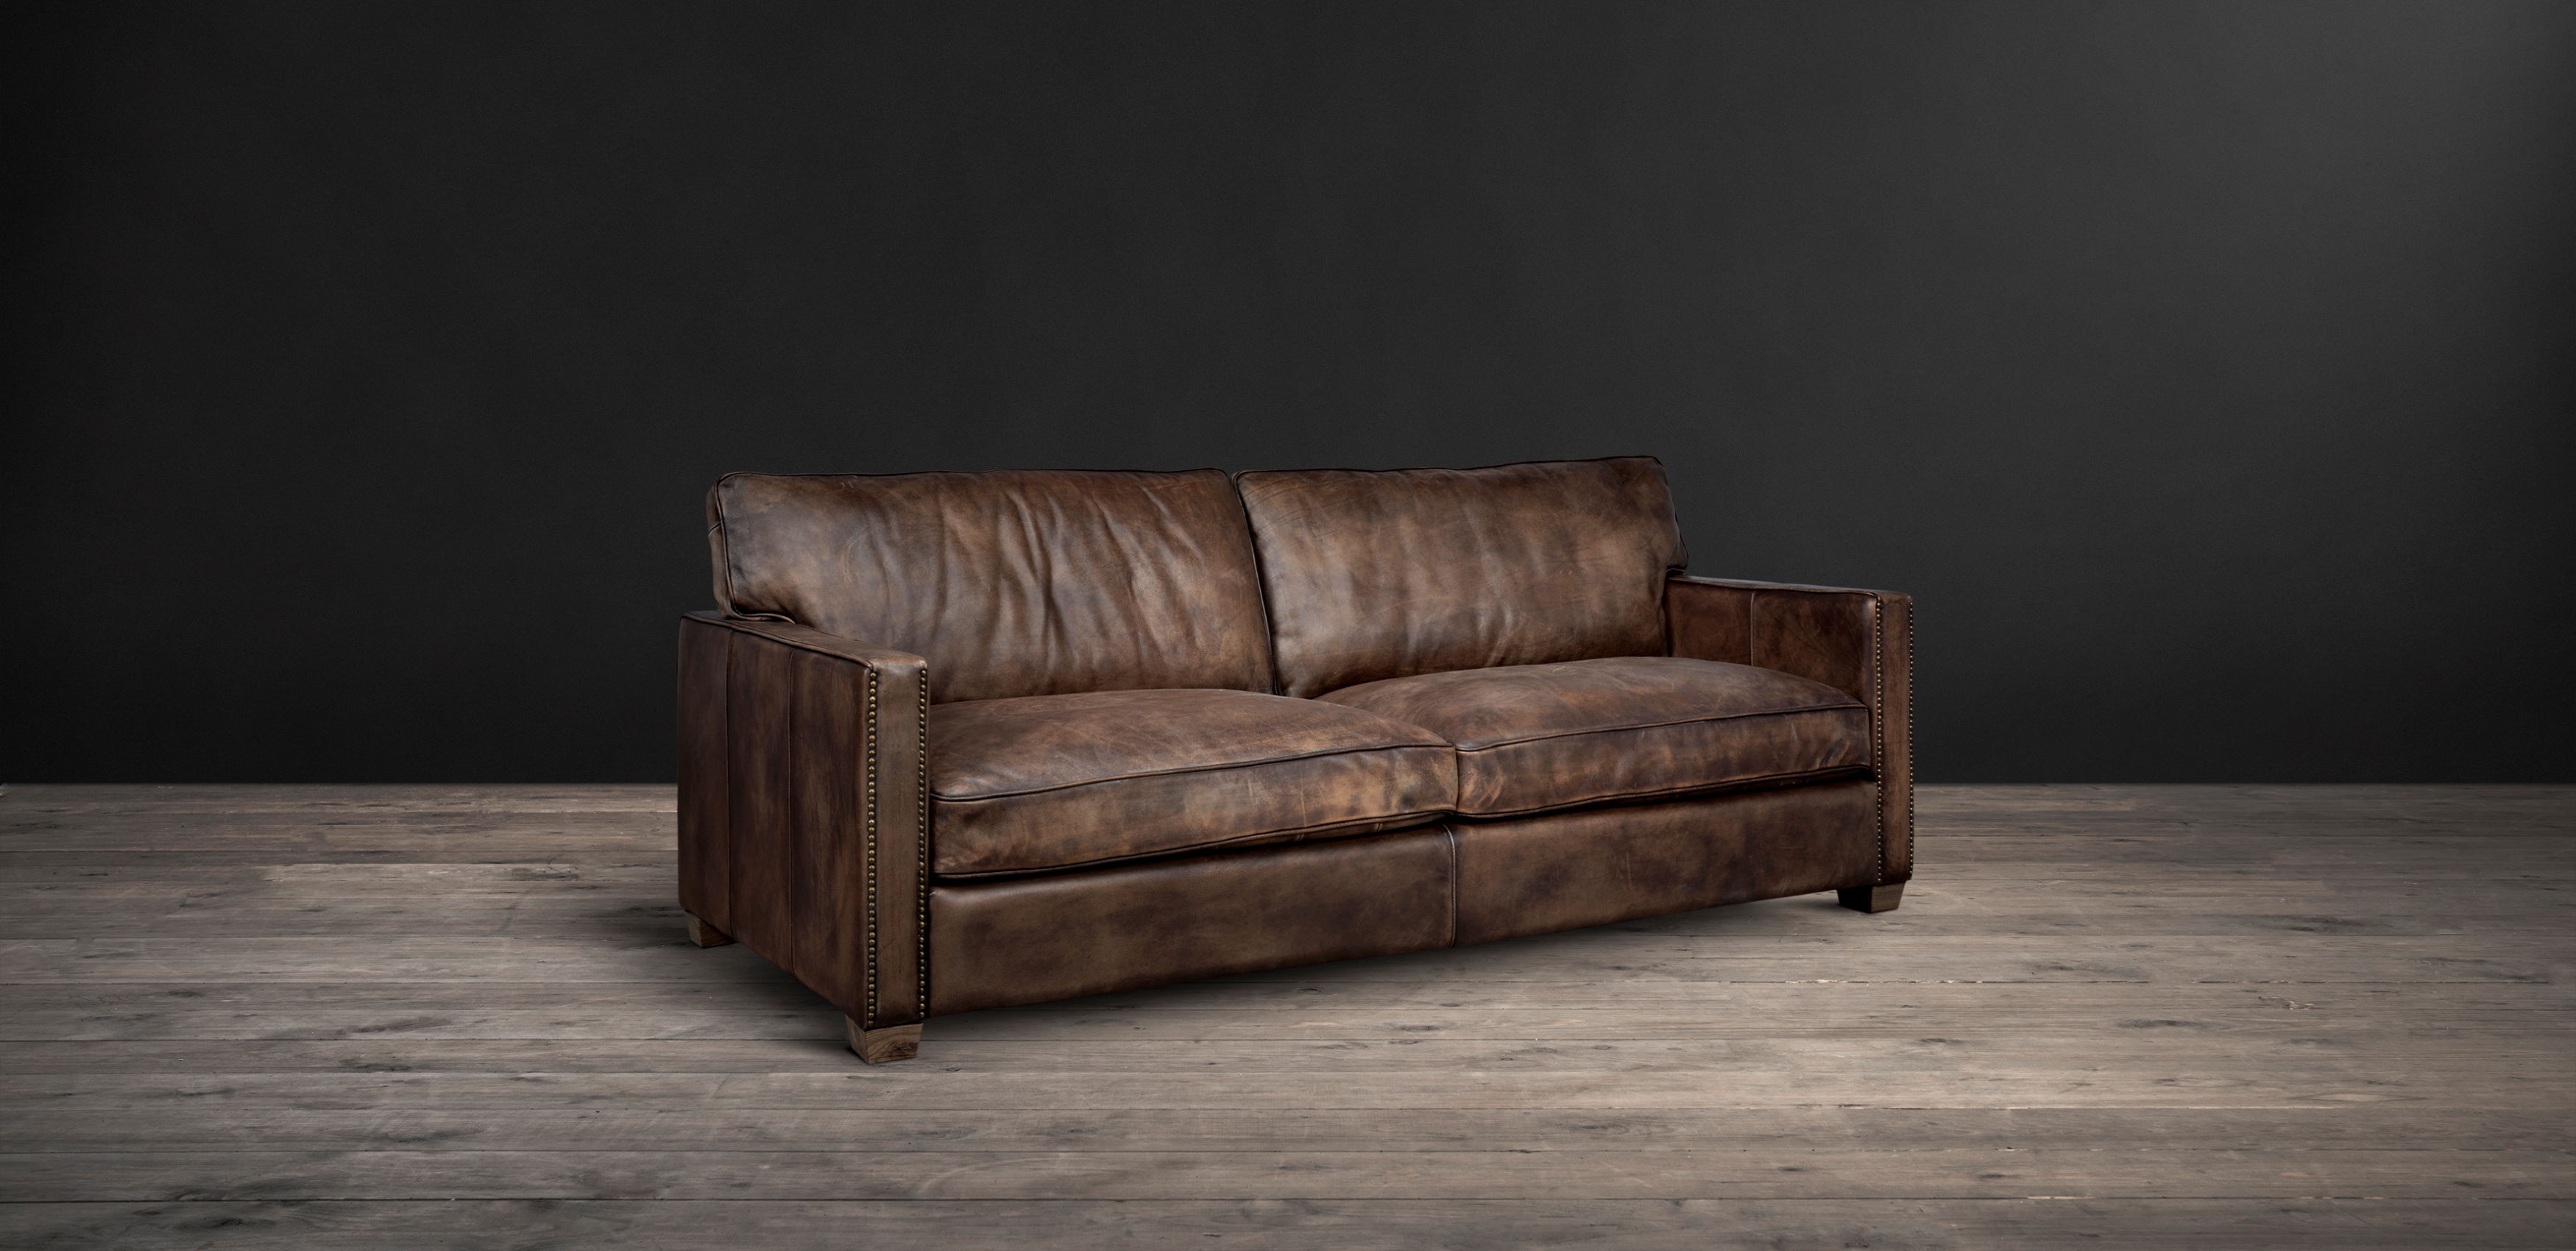 timothy oulton classic leather sofa - viscount william leather sofa from  side NNVVTBL